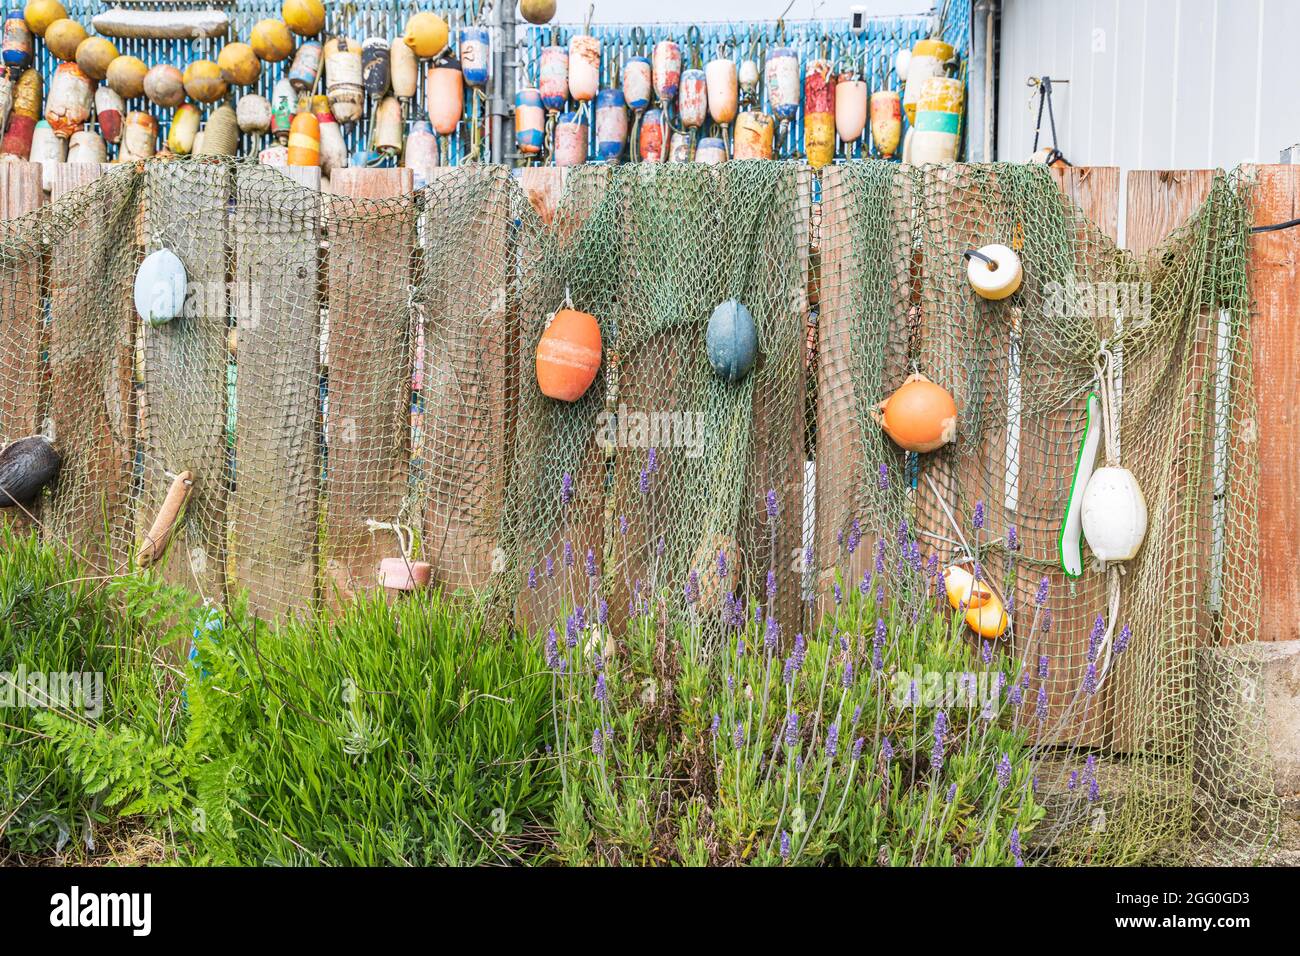 Coos Bay, Oregon, USA. Fishing net and crab trap floats on a fence